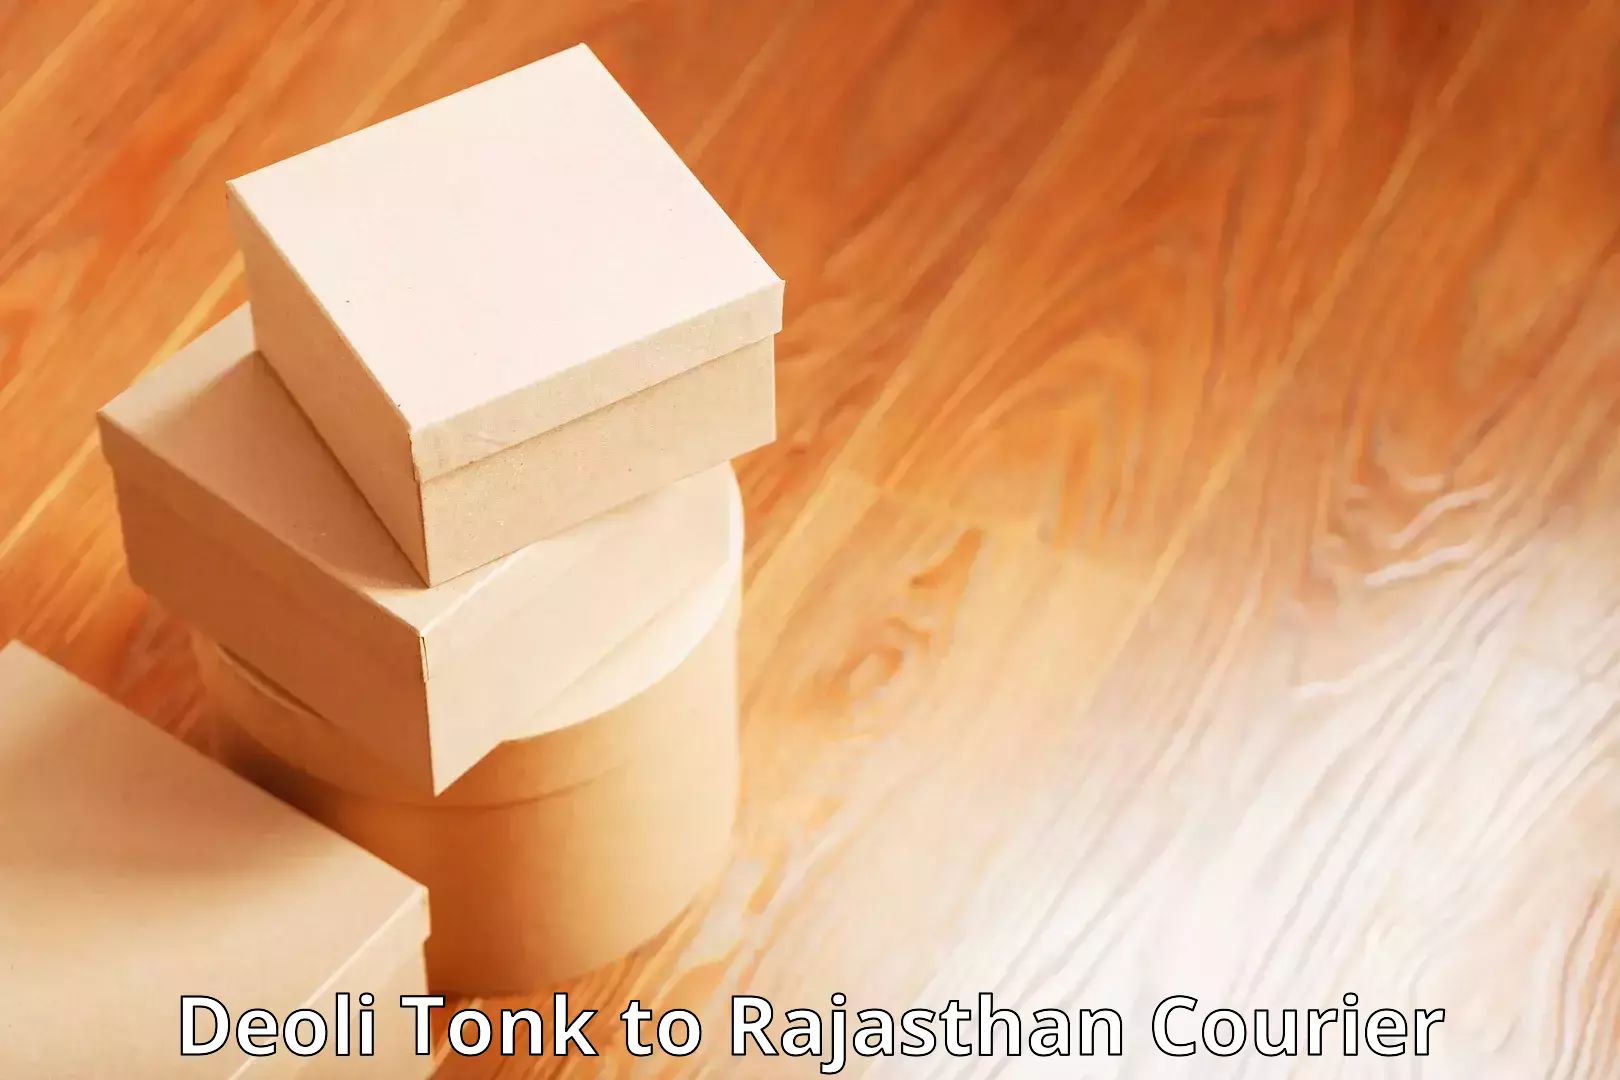 Global shipping solutions Deoli Tonk to Rajasthan